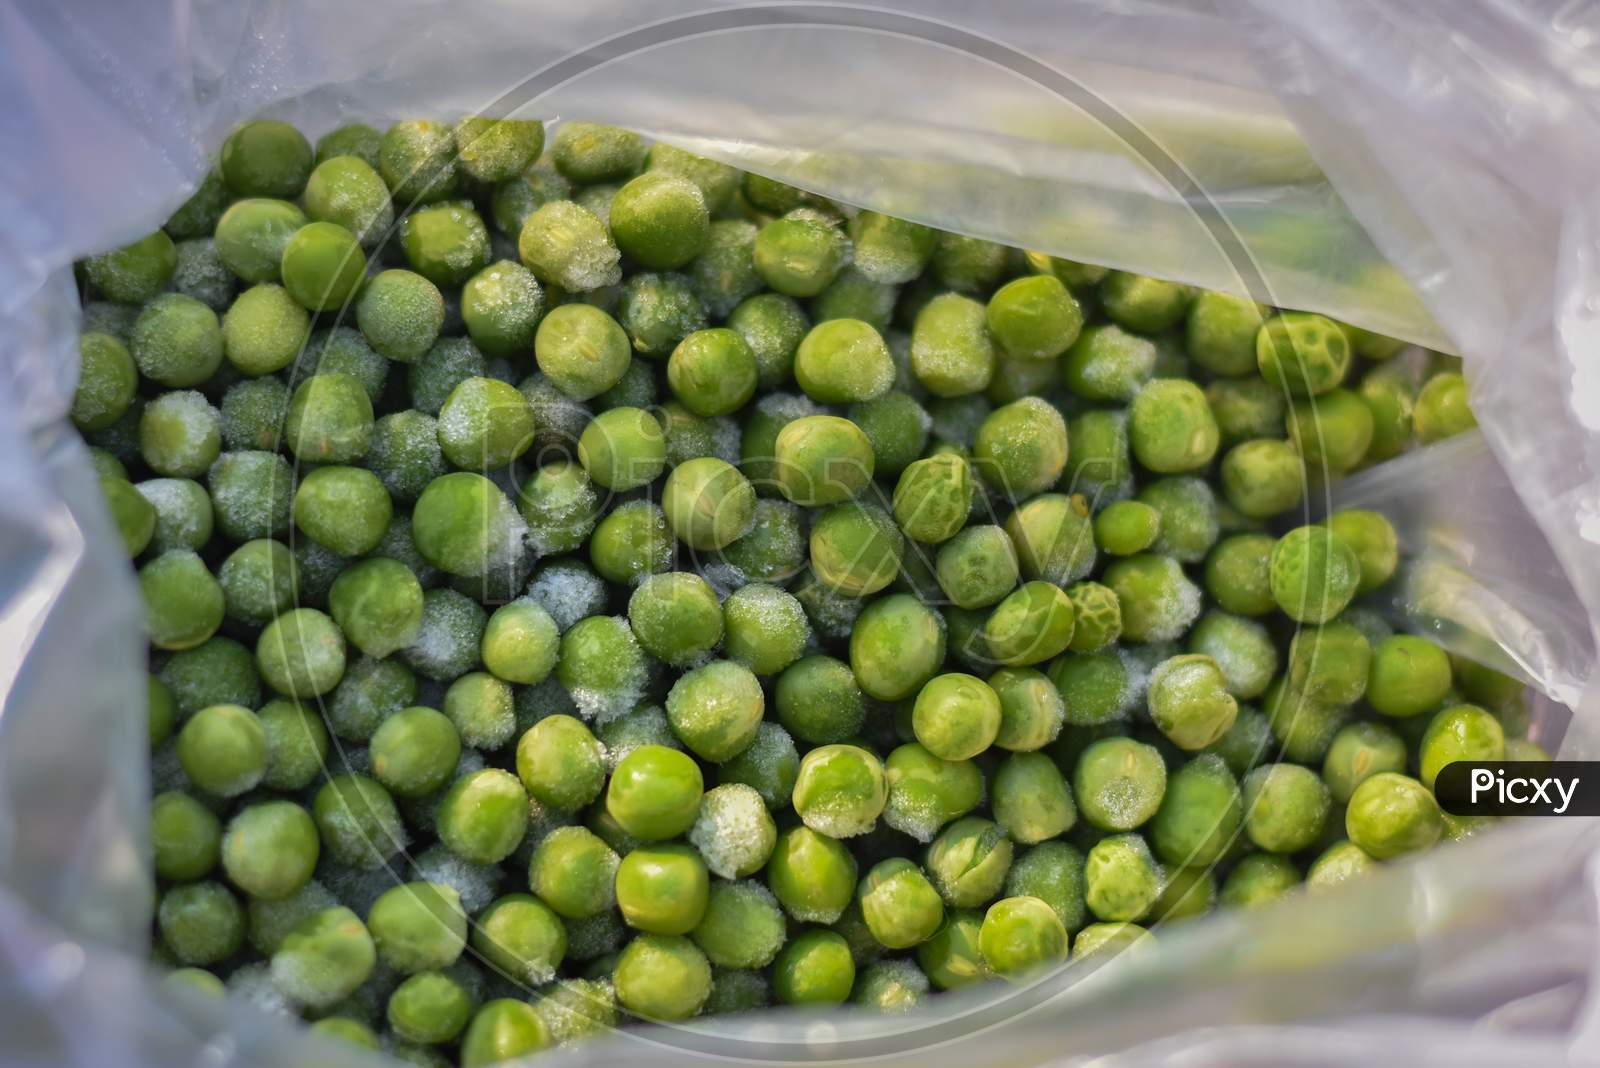 closeup of fresh green peas in the market